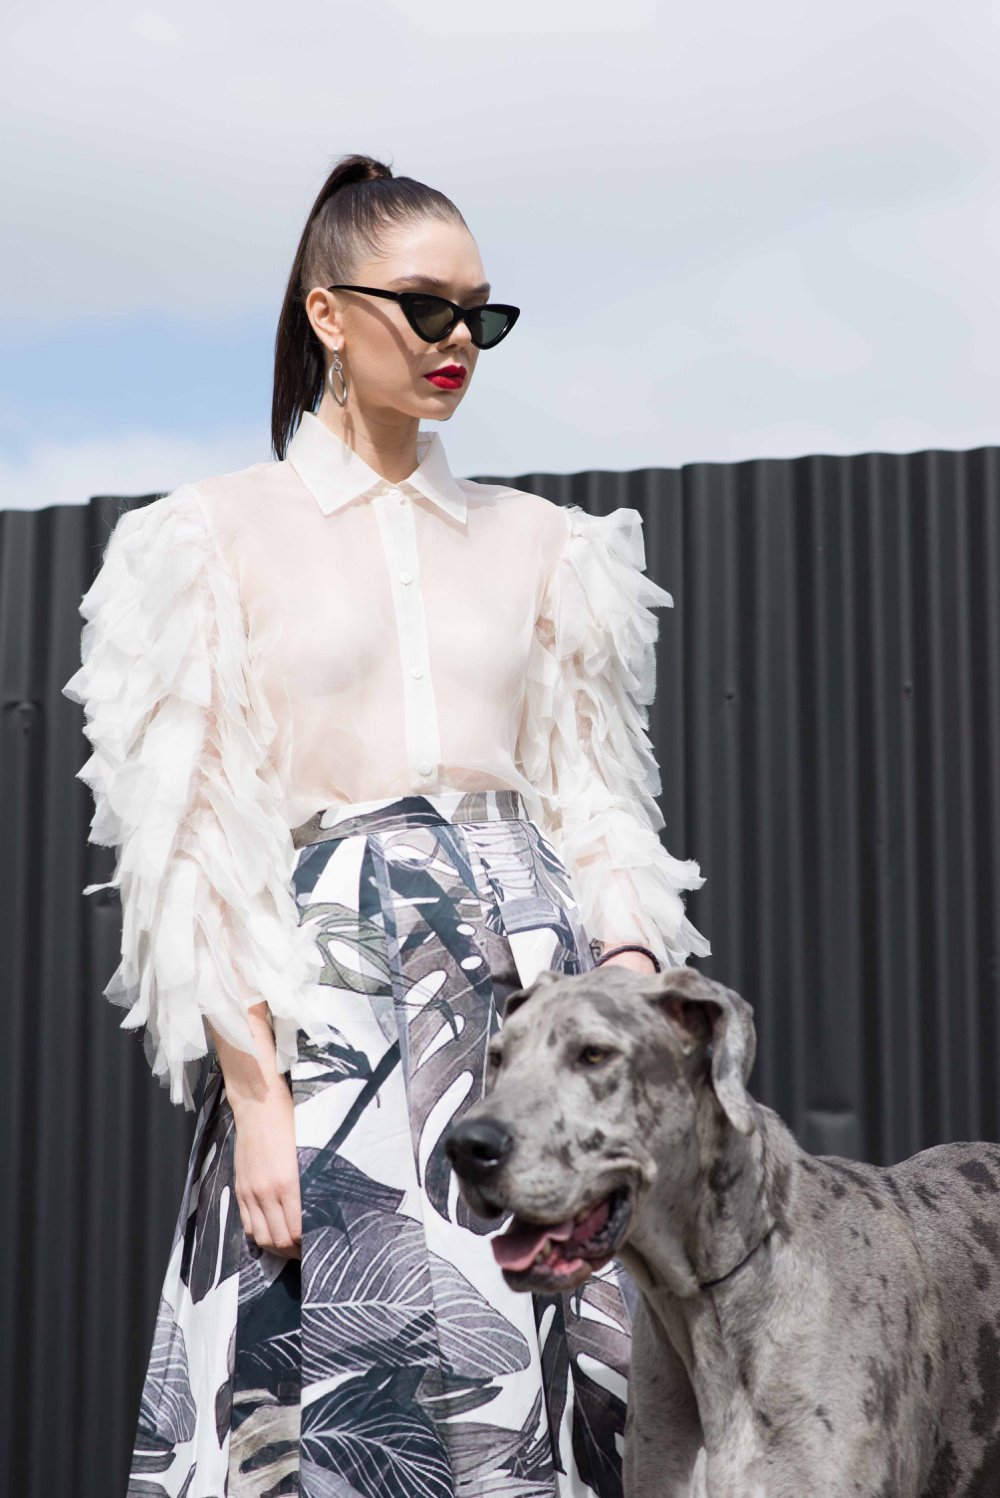 Georgia & Titan model Megan Salmon Designs to welcome in the Chinese New Year of the Dog